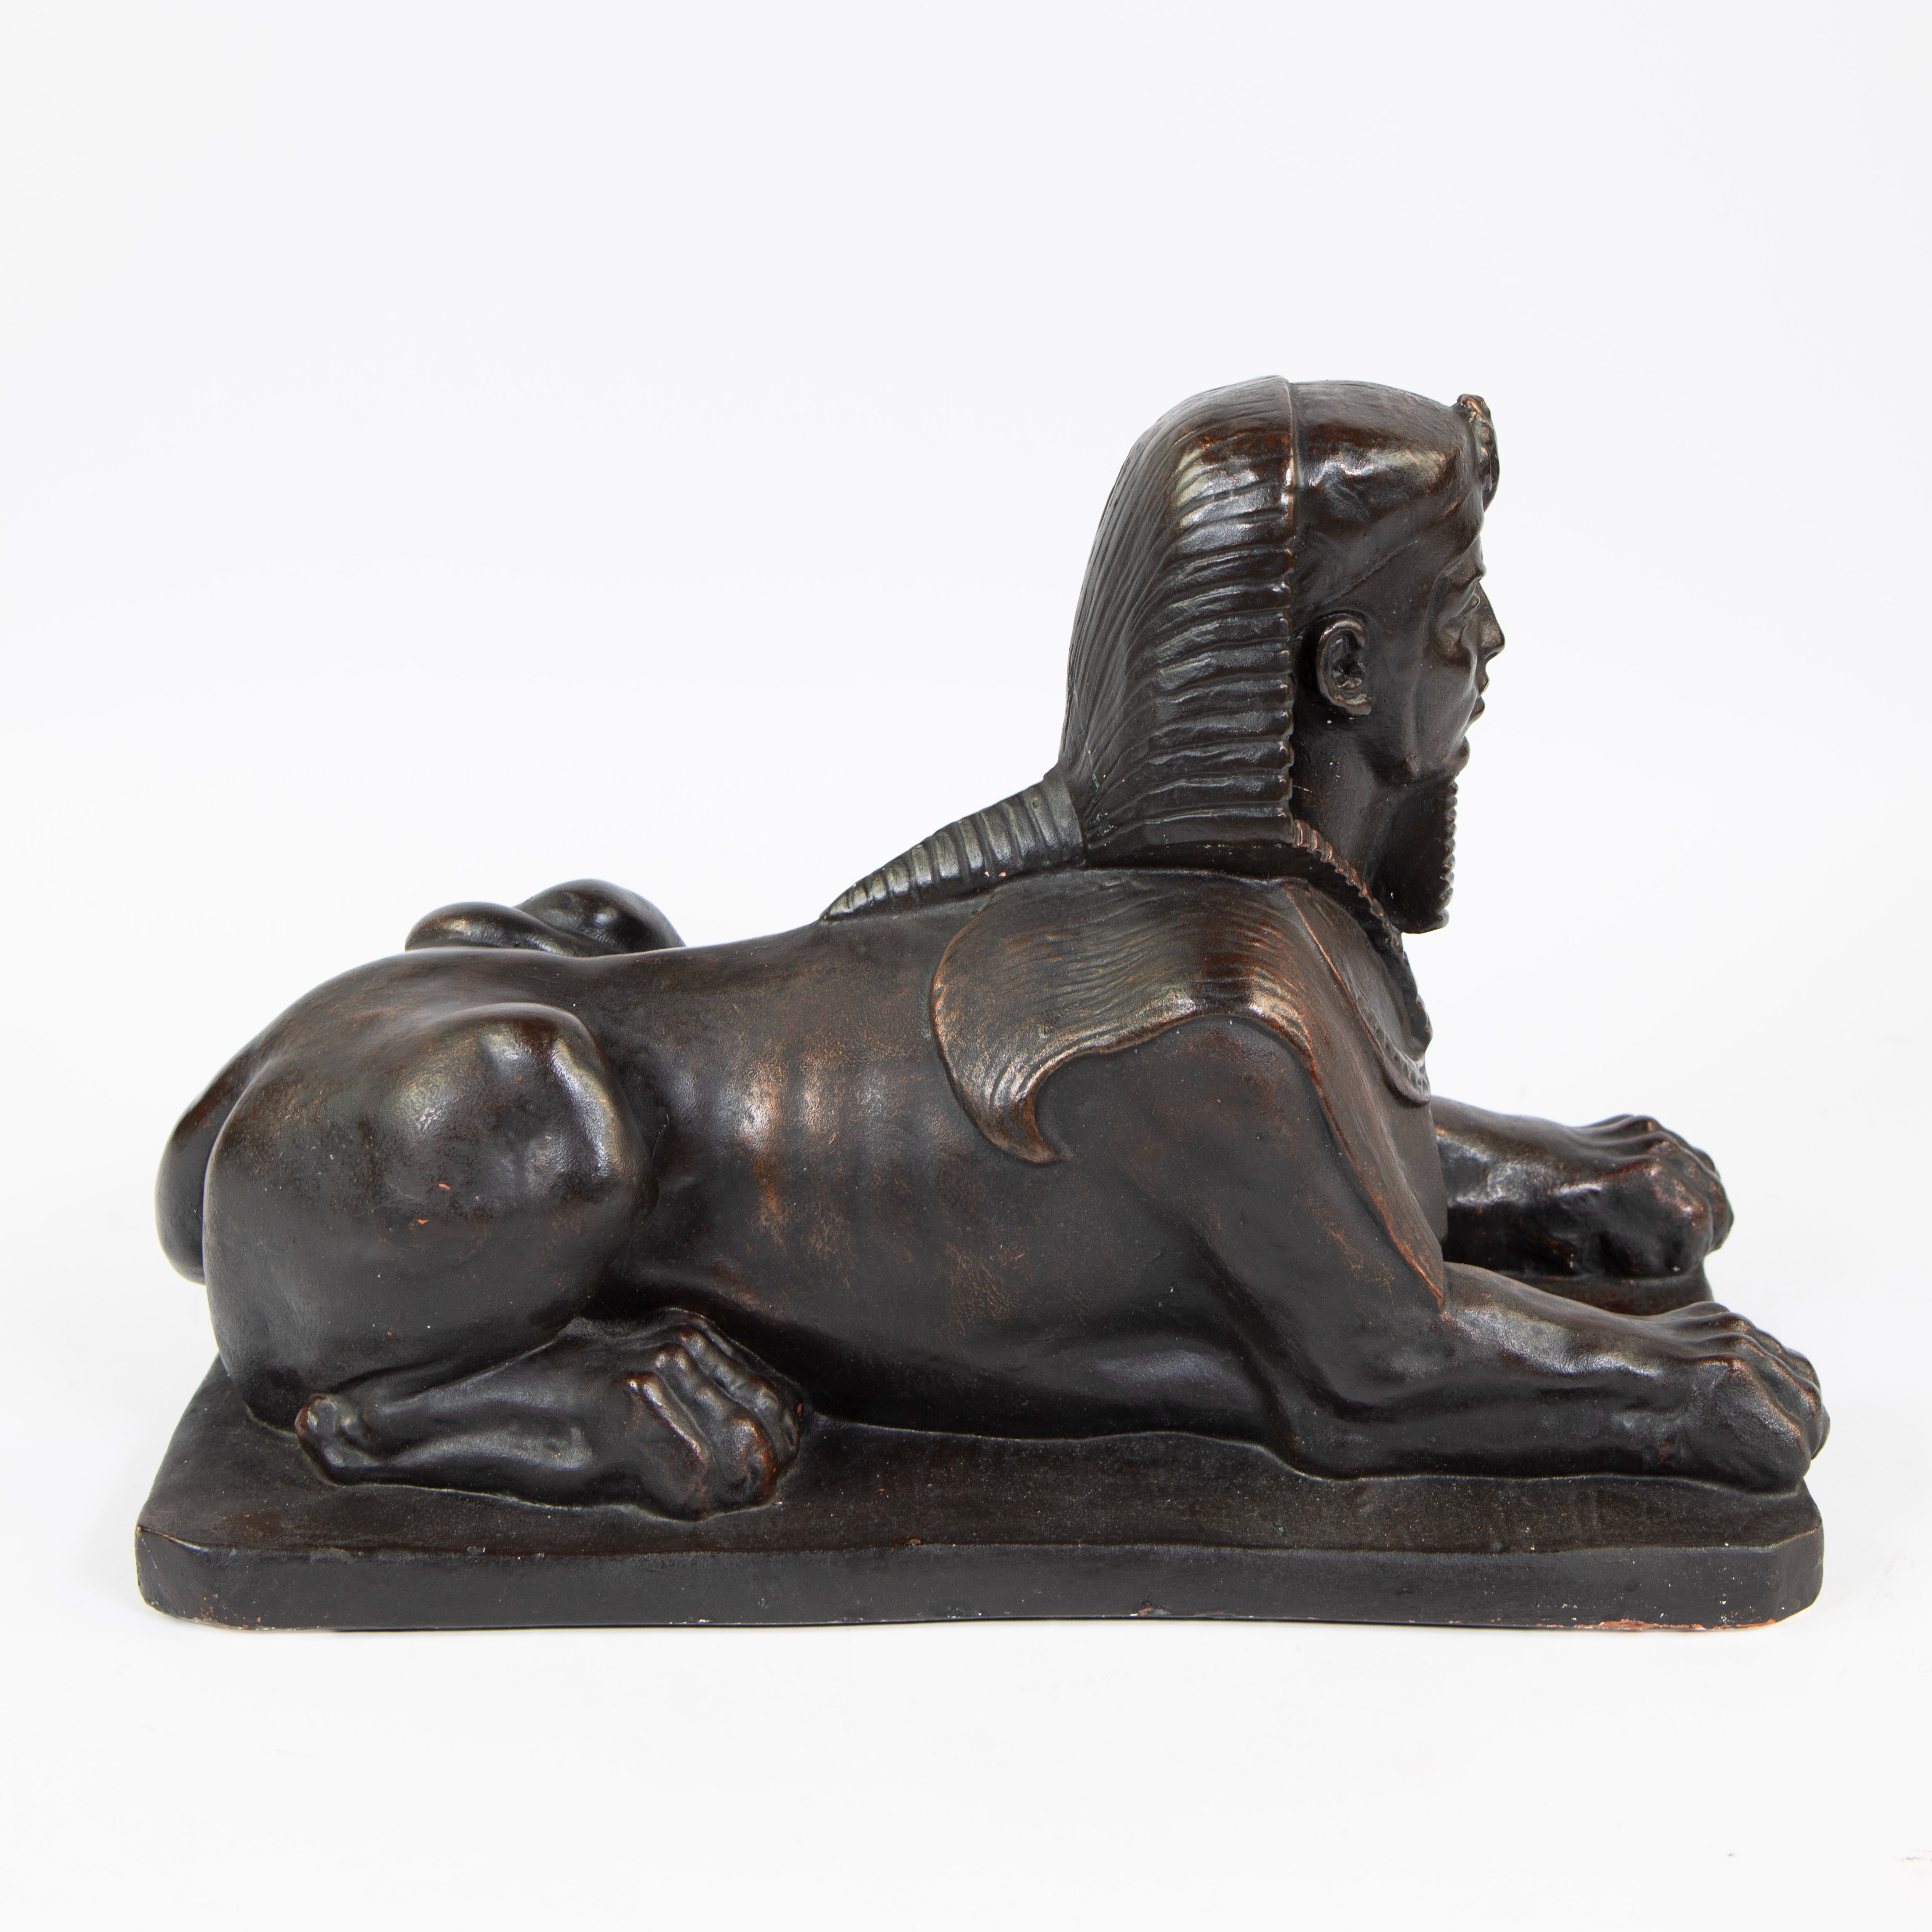 Large patinated Sphinx in plâtre de Paris, French, ca 1900 - Image 4 of 5